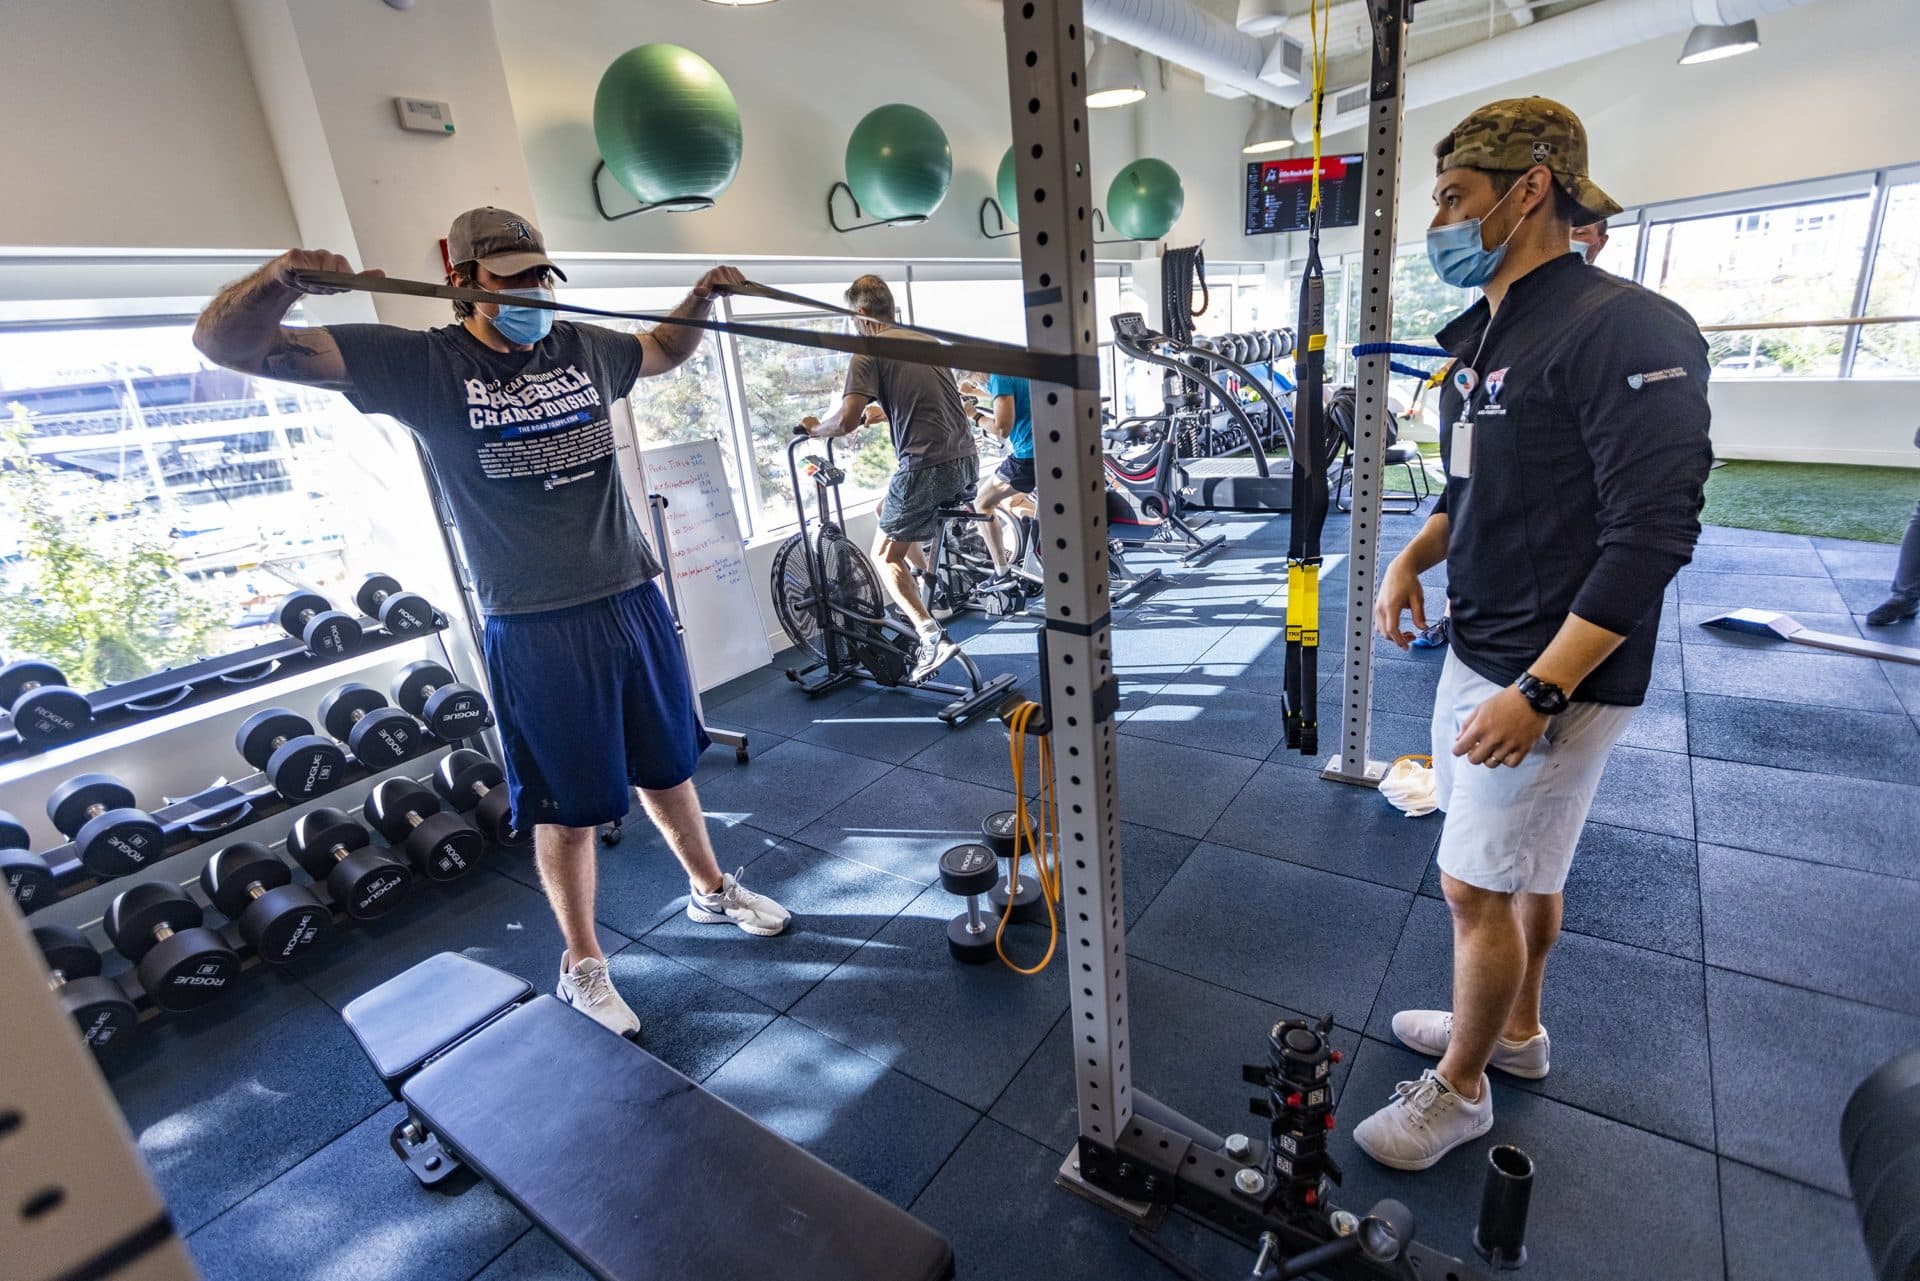 Athletic trainer and strength conditioning specialist Chris Manzano watches as Ryan Campbell does band exercises in the gym at Home Base in Charlestown. (Jesse Costa/WBUR)